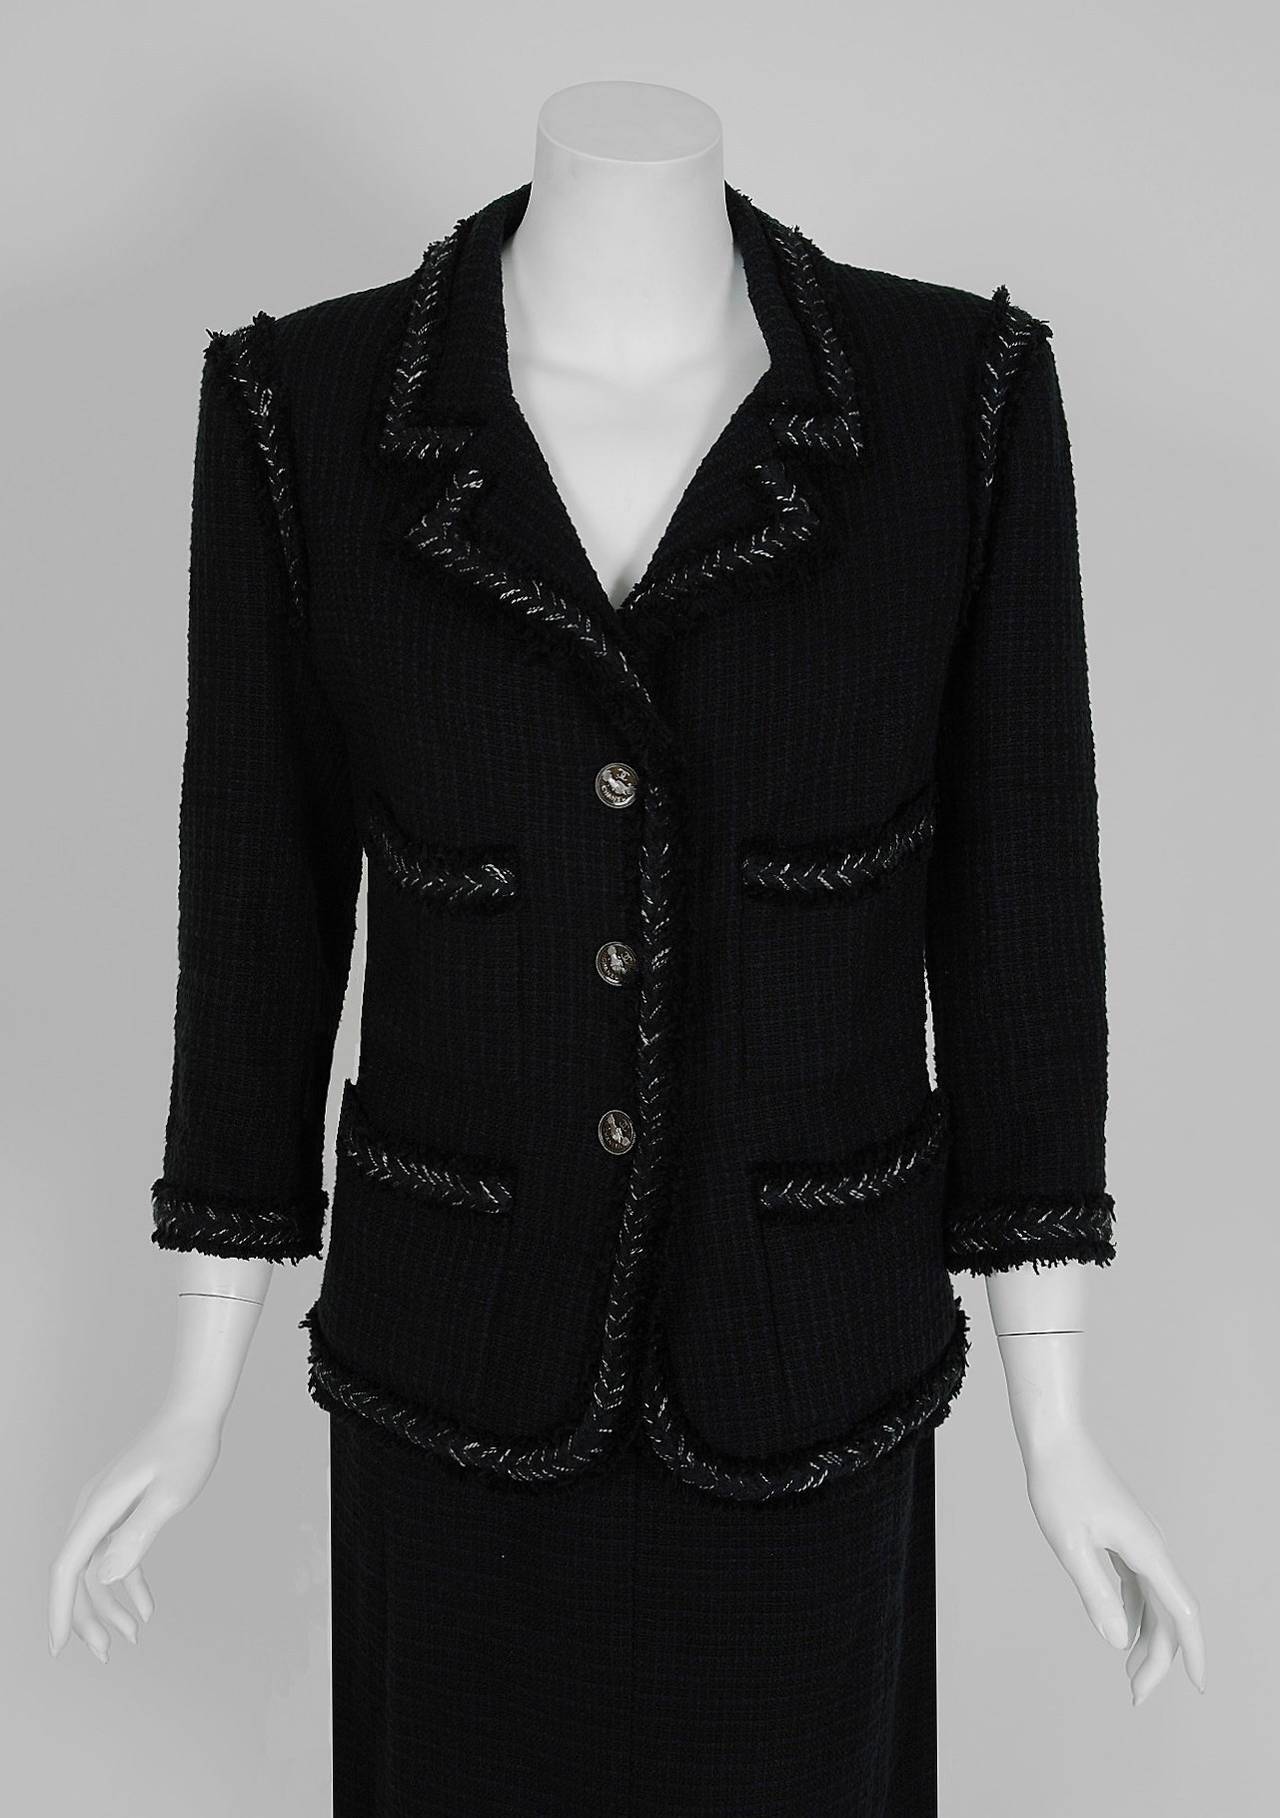 Breathtaking Chanel fall season runway ensemble which retailed for over $7,000 in 2008! Chanel is known to be one of the most luxurious and decadent fashion houses in the world. This gorgeous black woven boucle-wool suit is a perfect example of why